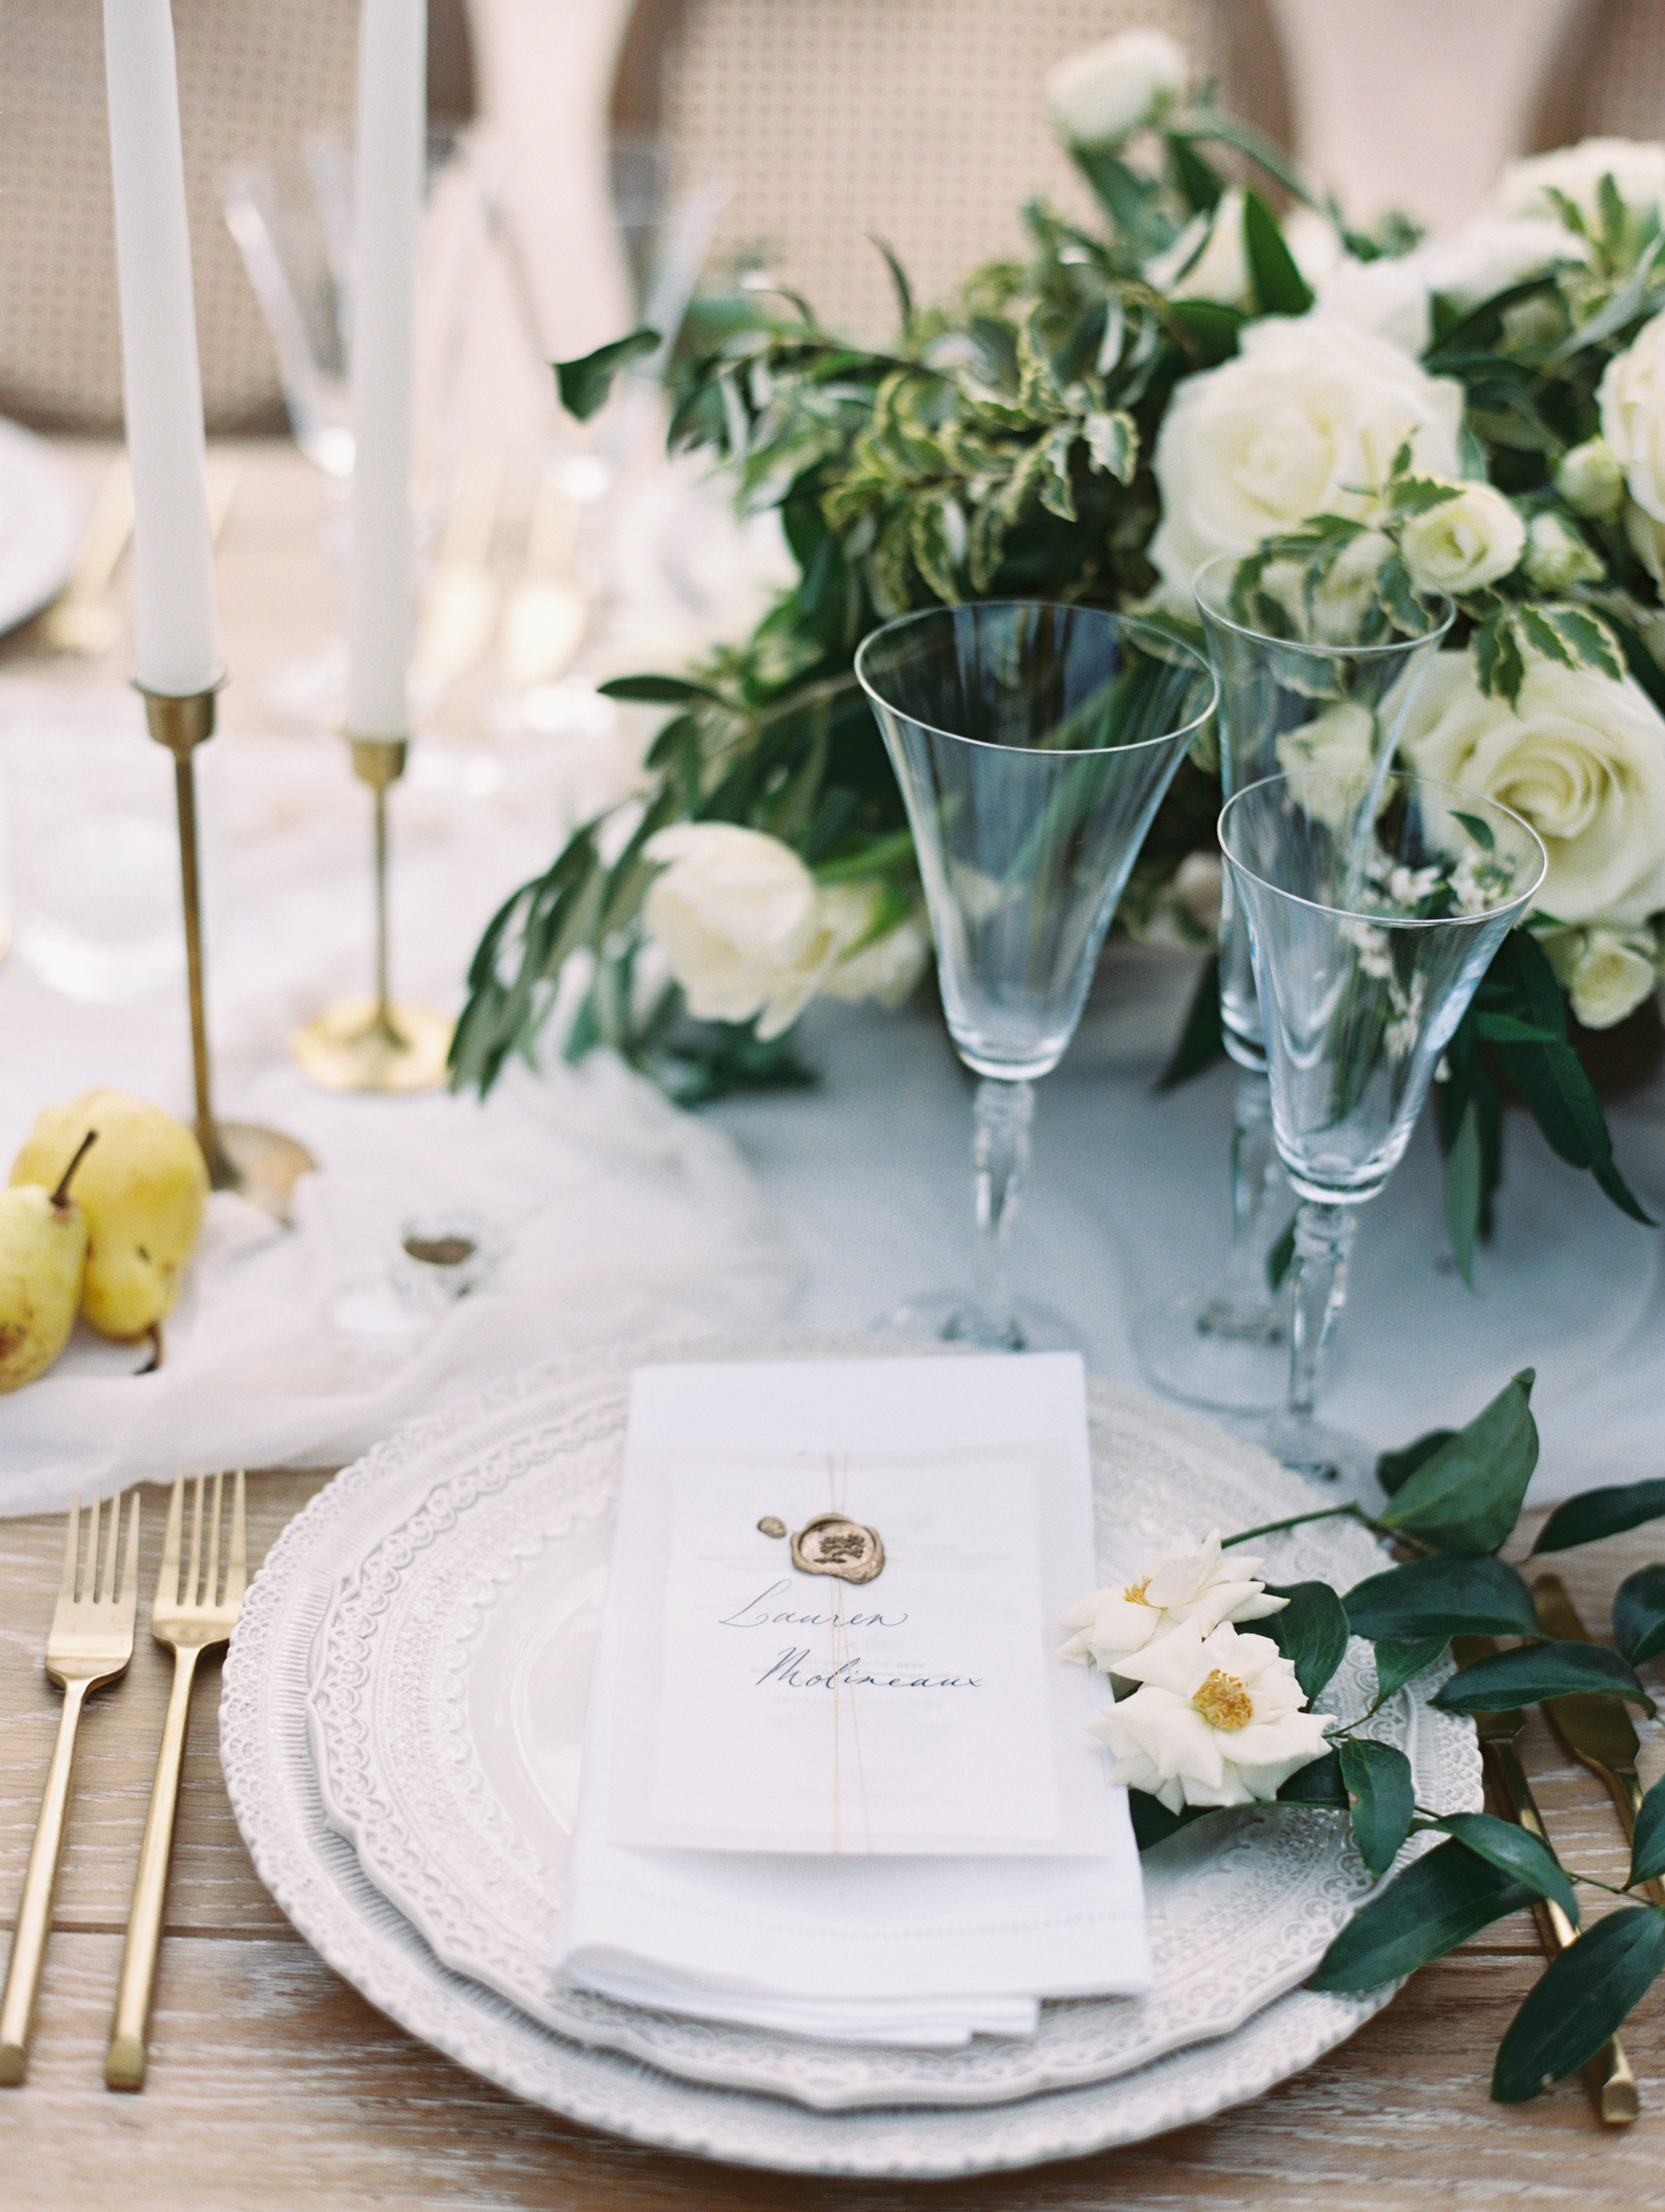 Photography: Lisa Ziesing with Abby Jiu Photography | Planning & Styling: Lauryn Prattes Styling and Events | Handmade Paper & Calligraphy: Spurlé Gul Studio | Florals: Sweet Root Village